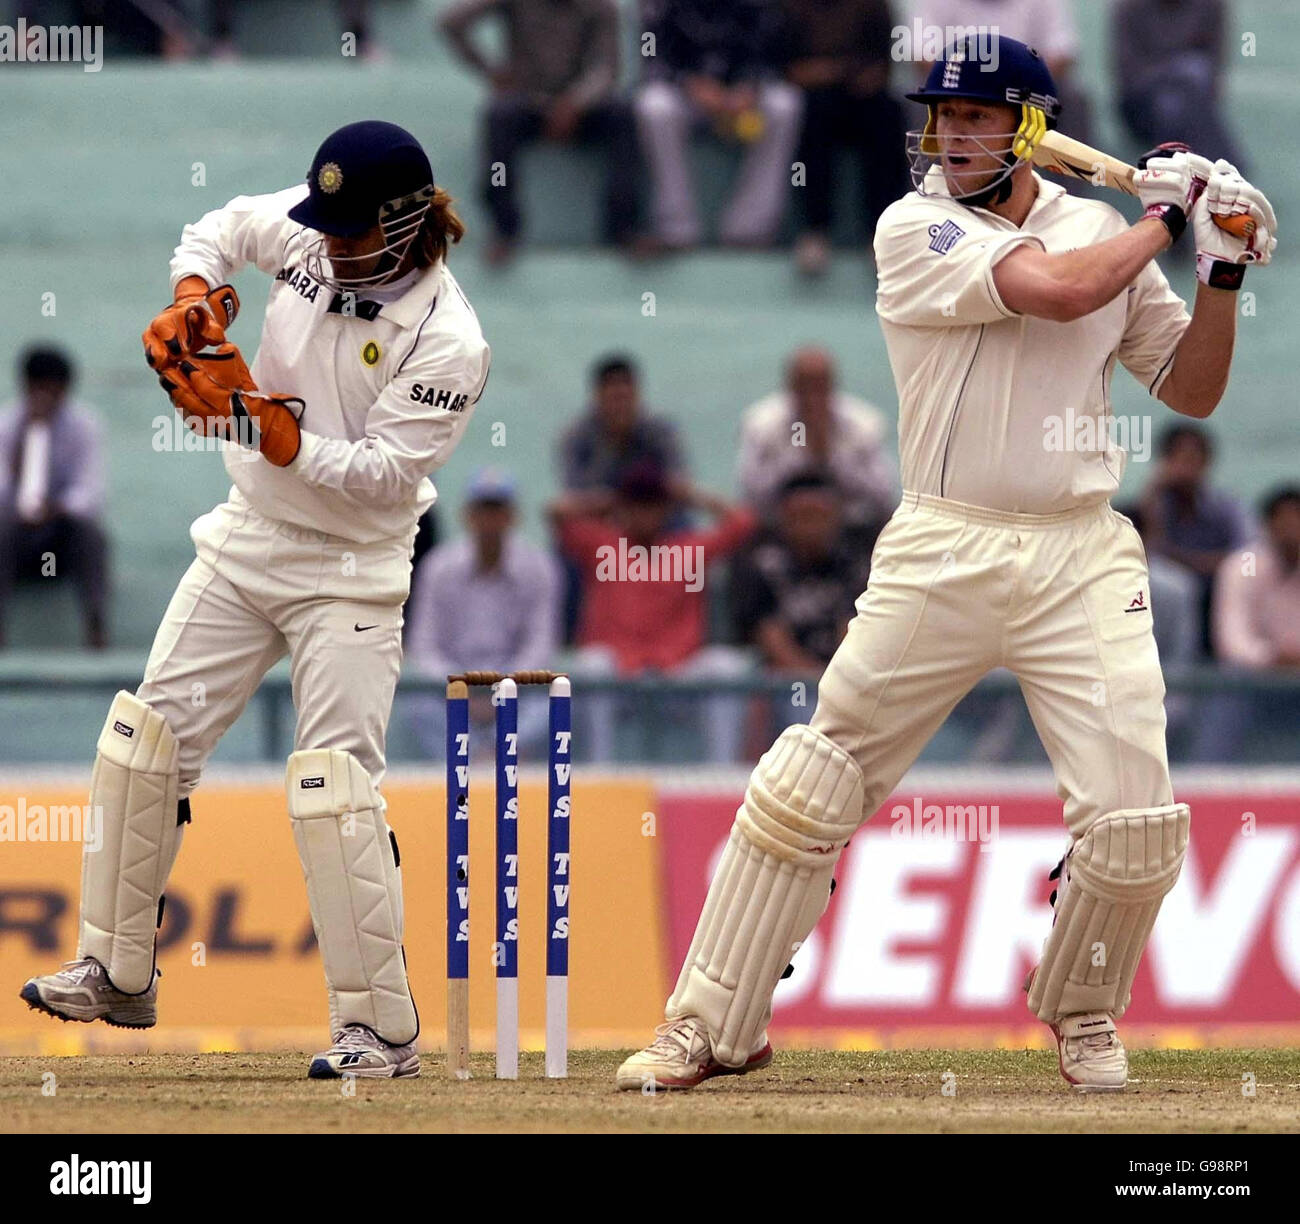 England captain Andrew Flintoff (R) in action during the second day of the second Test match against India at the PCA Stadium, Mohali, India, Friday March 10, 2006. PRESS ASSOCIATION Photo. Photo credit should read: Rebecca Naden/PA. Stock Photo